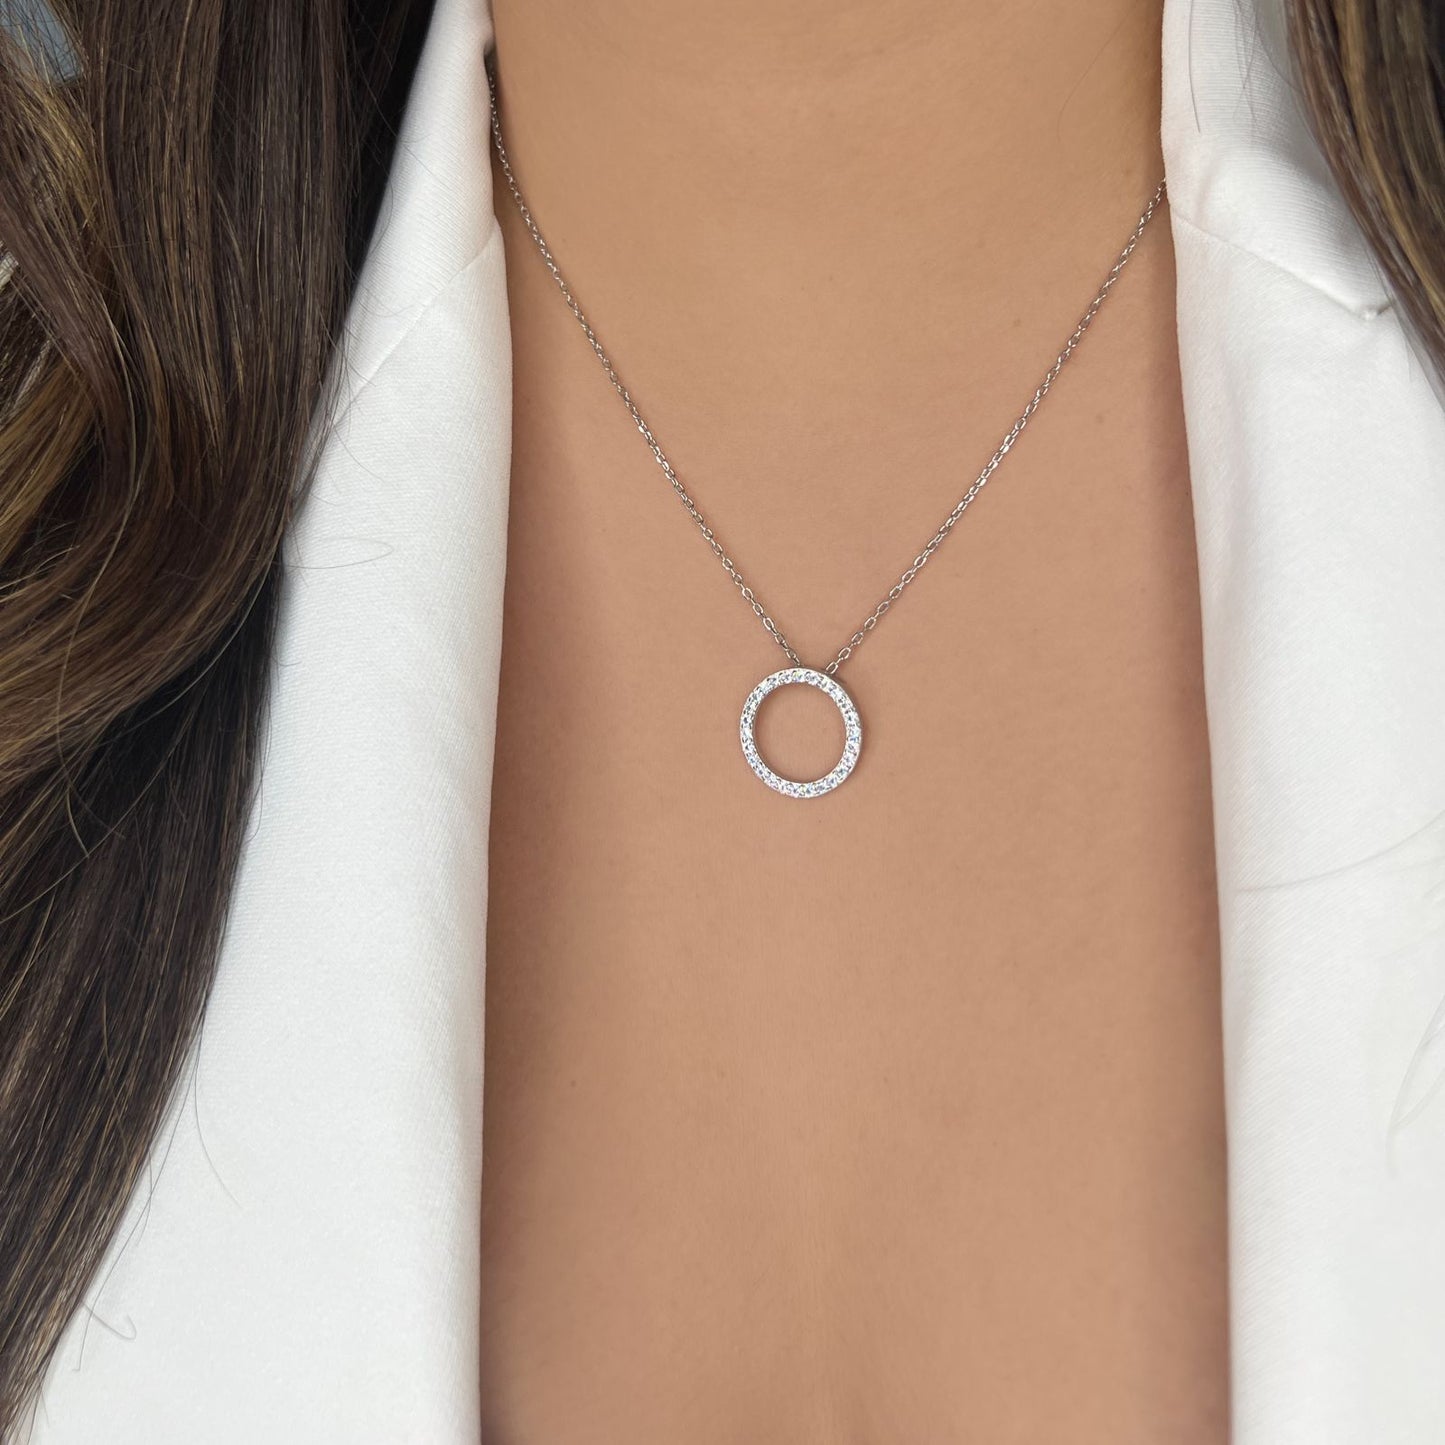 Bling Circle Necklace